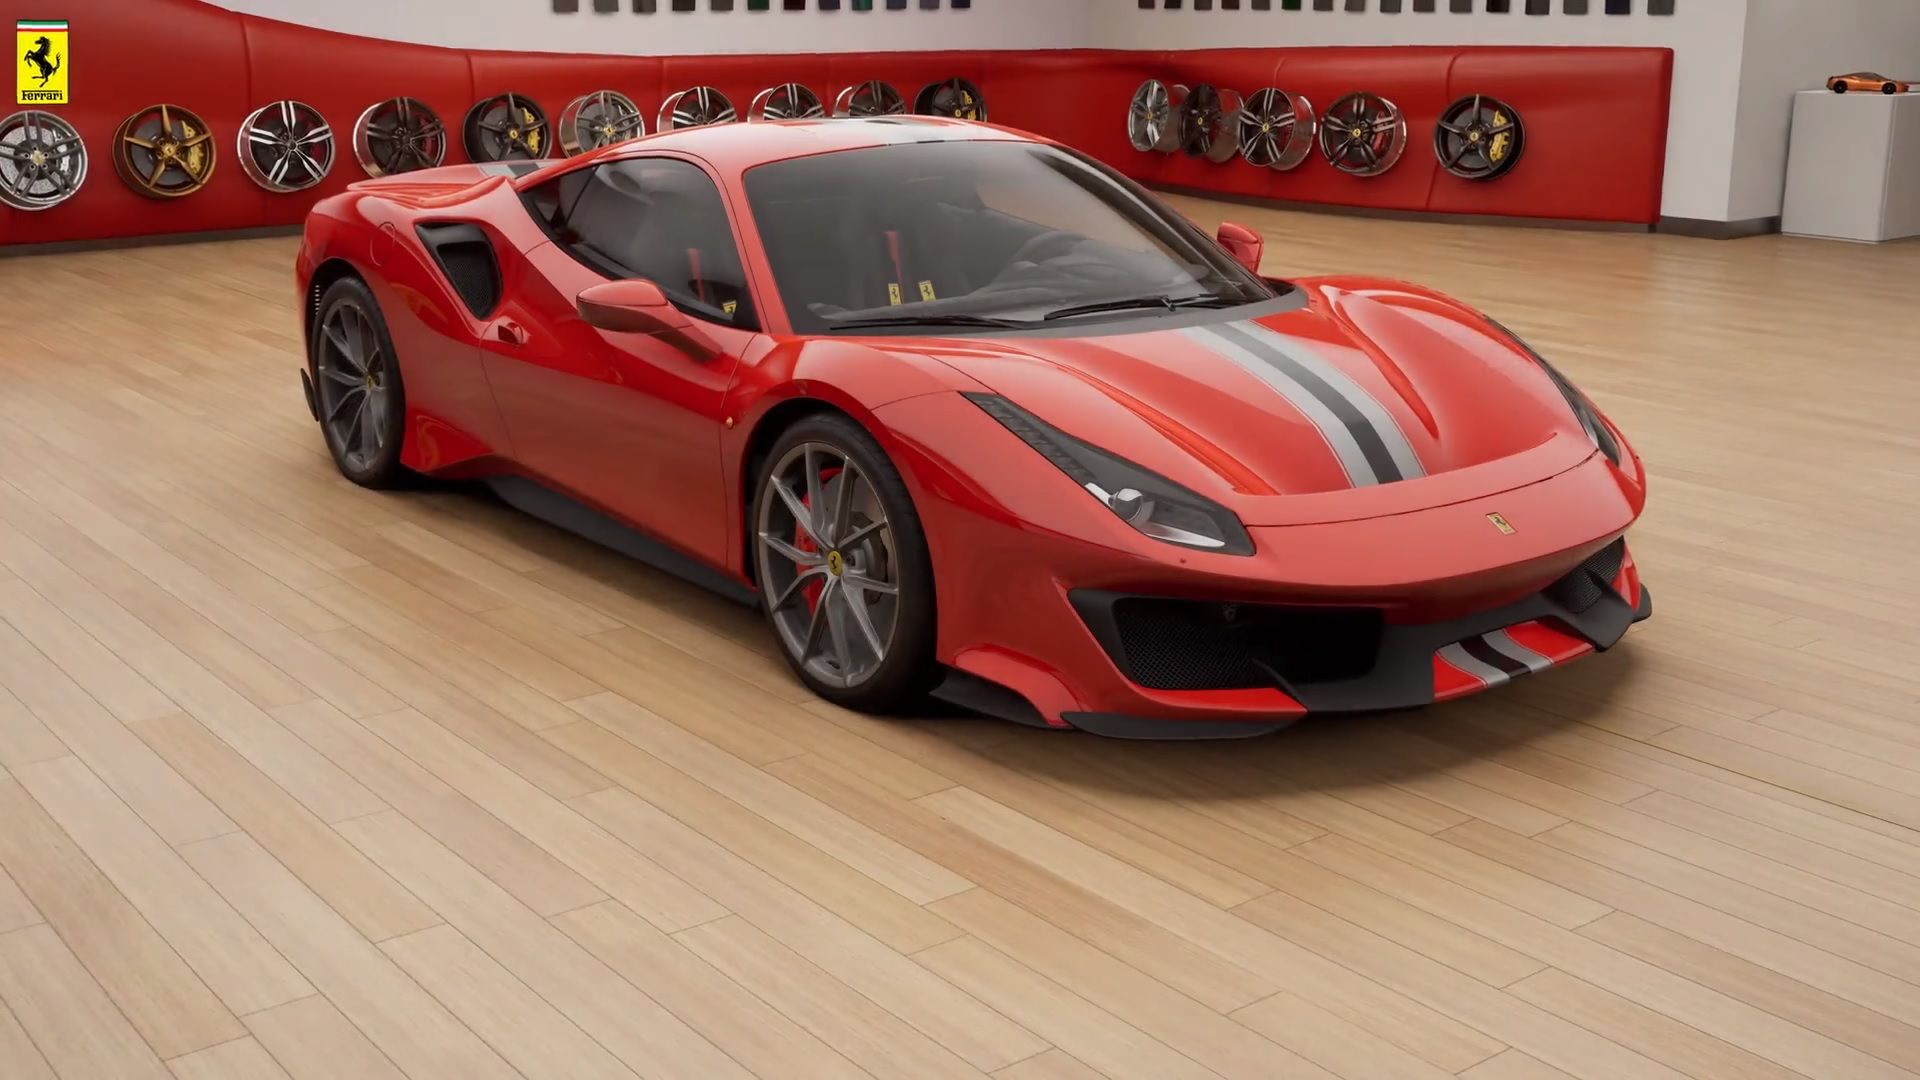 2018 The Ferrari 488 Pista Just Leaked, And It Looks Ready To Battle The Porsche 911 GT2 RS